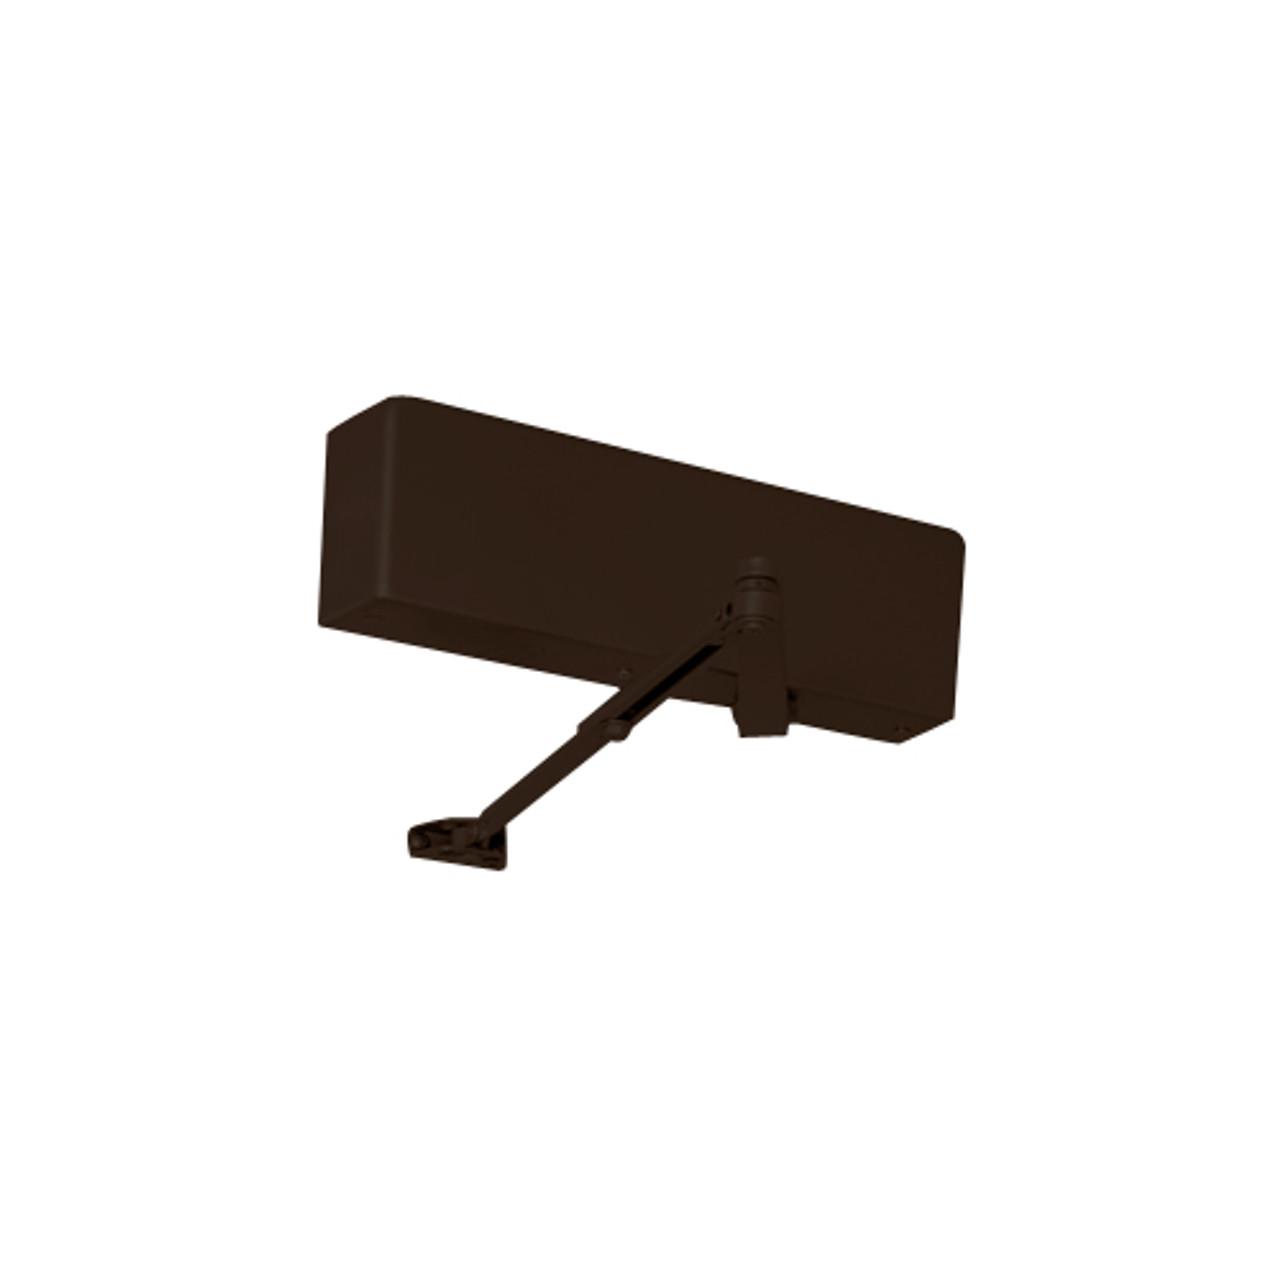 JL7500H-690 Norton 7500 Series Hold Open Institutional Door Closer with Top Jamb Only Reveals 2-3/4 to 6-3/4 inch to 180 Degree in Statuary Bronze Finish